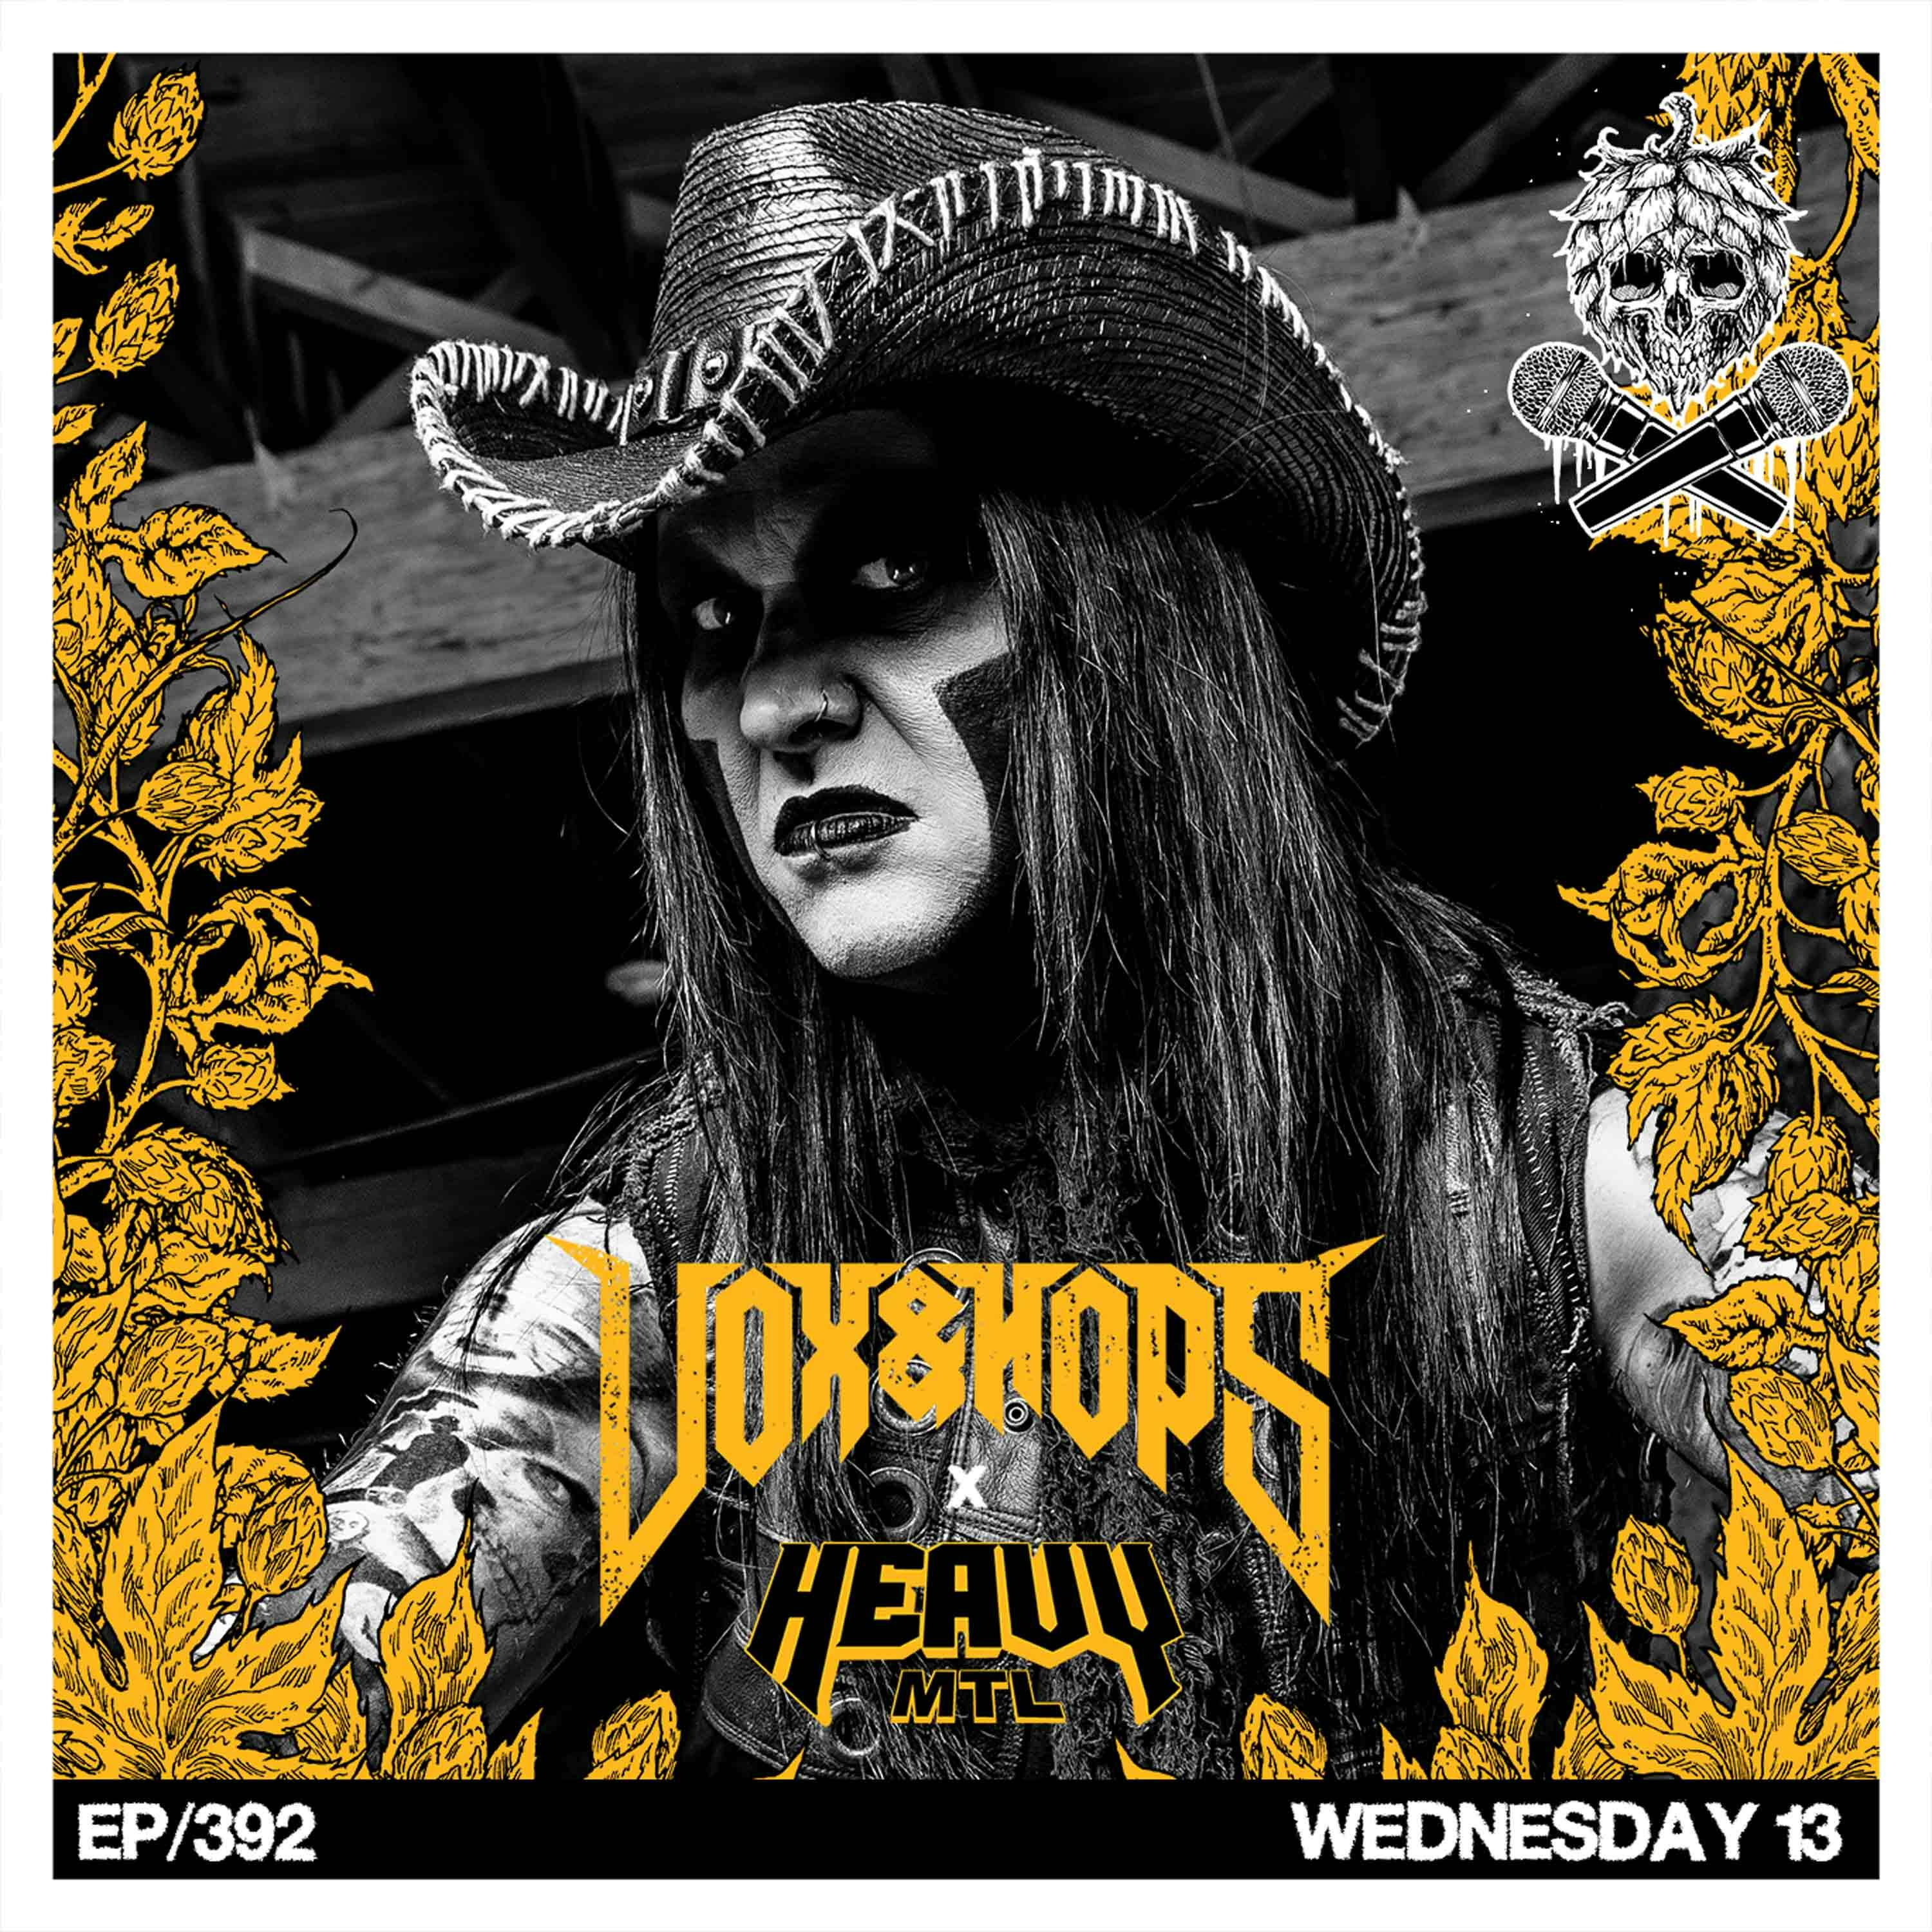 Late to the Party with Wednesday 13